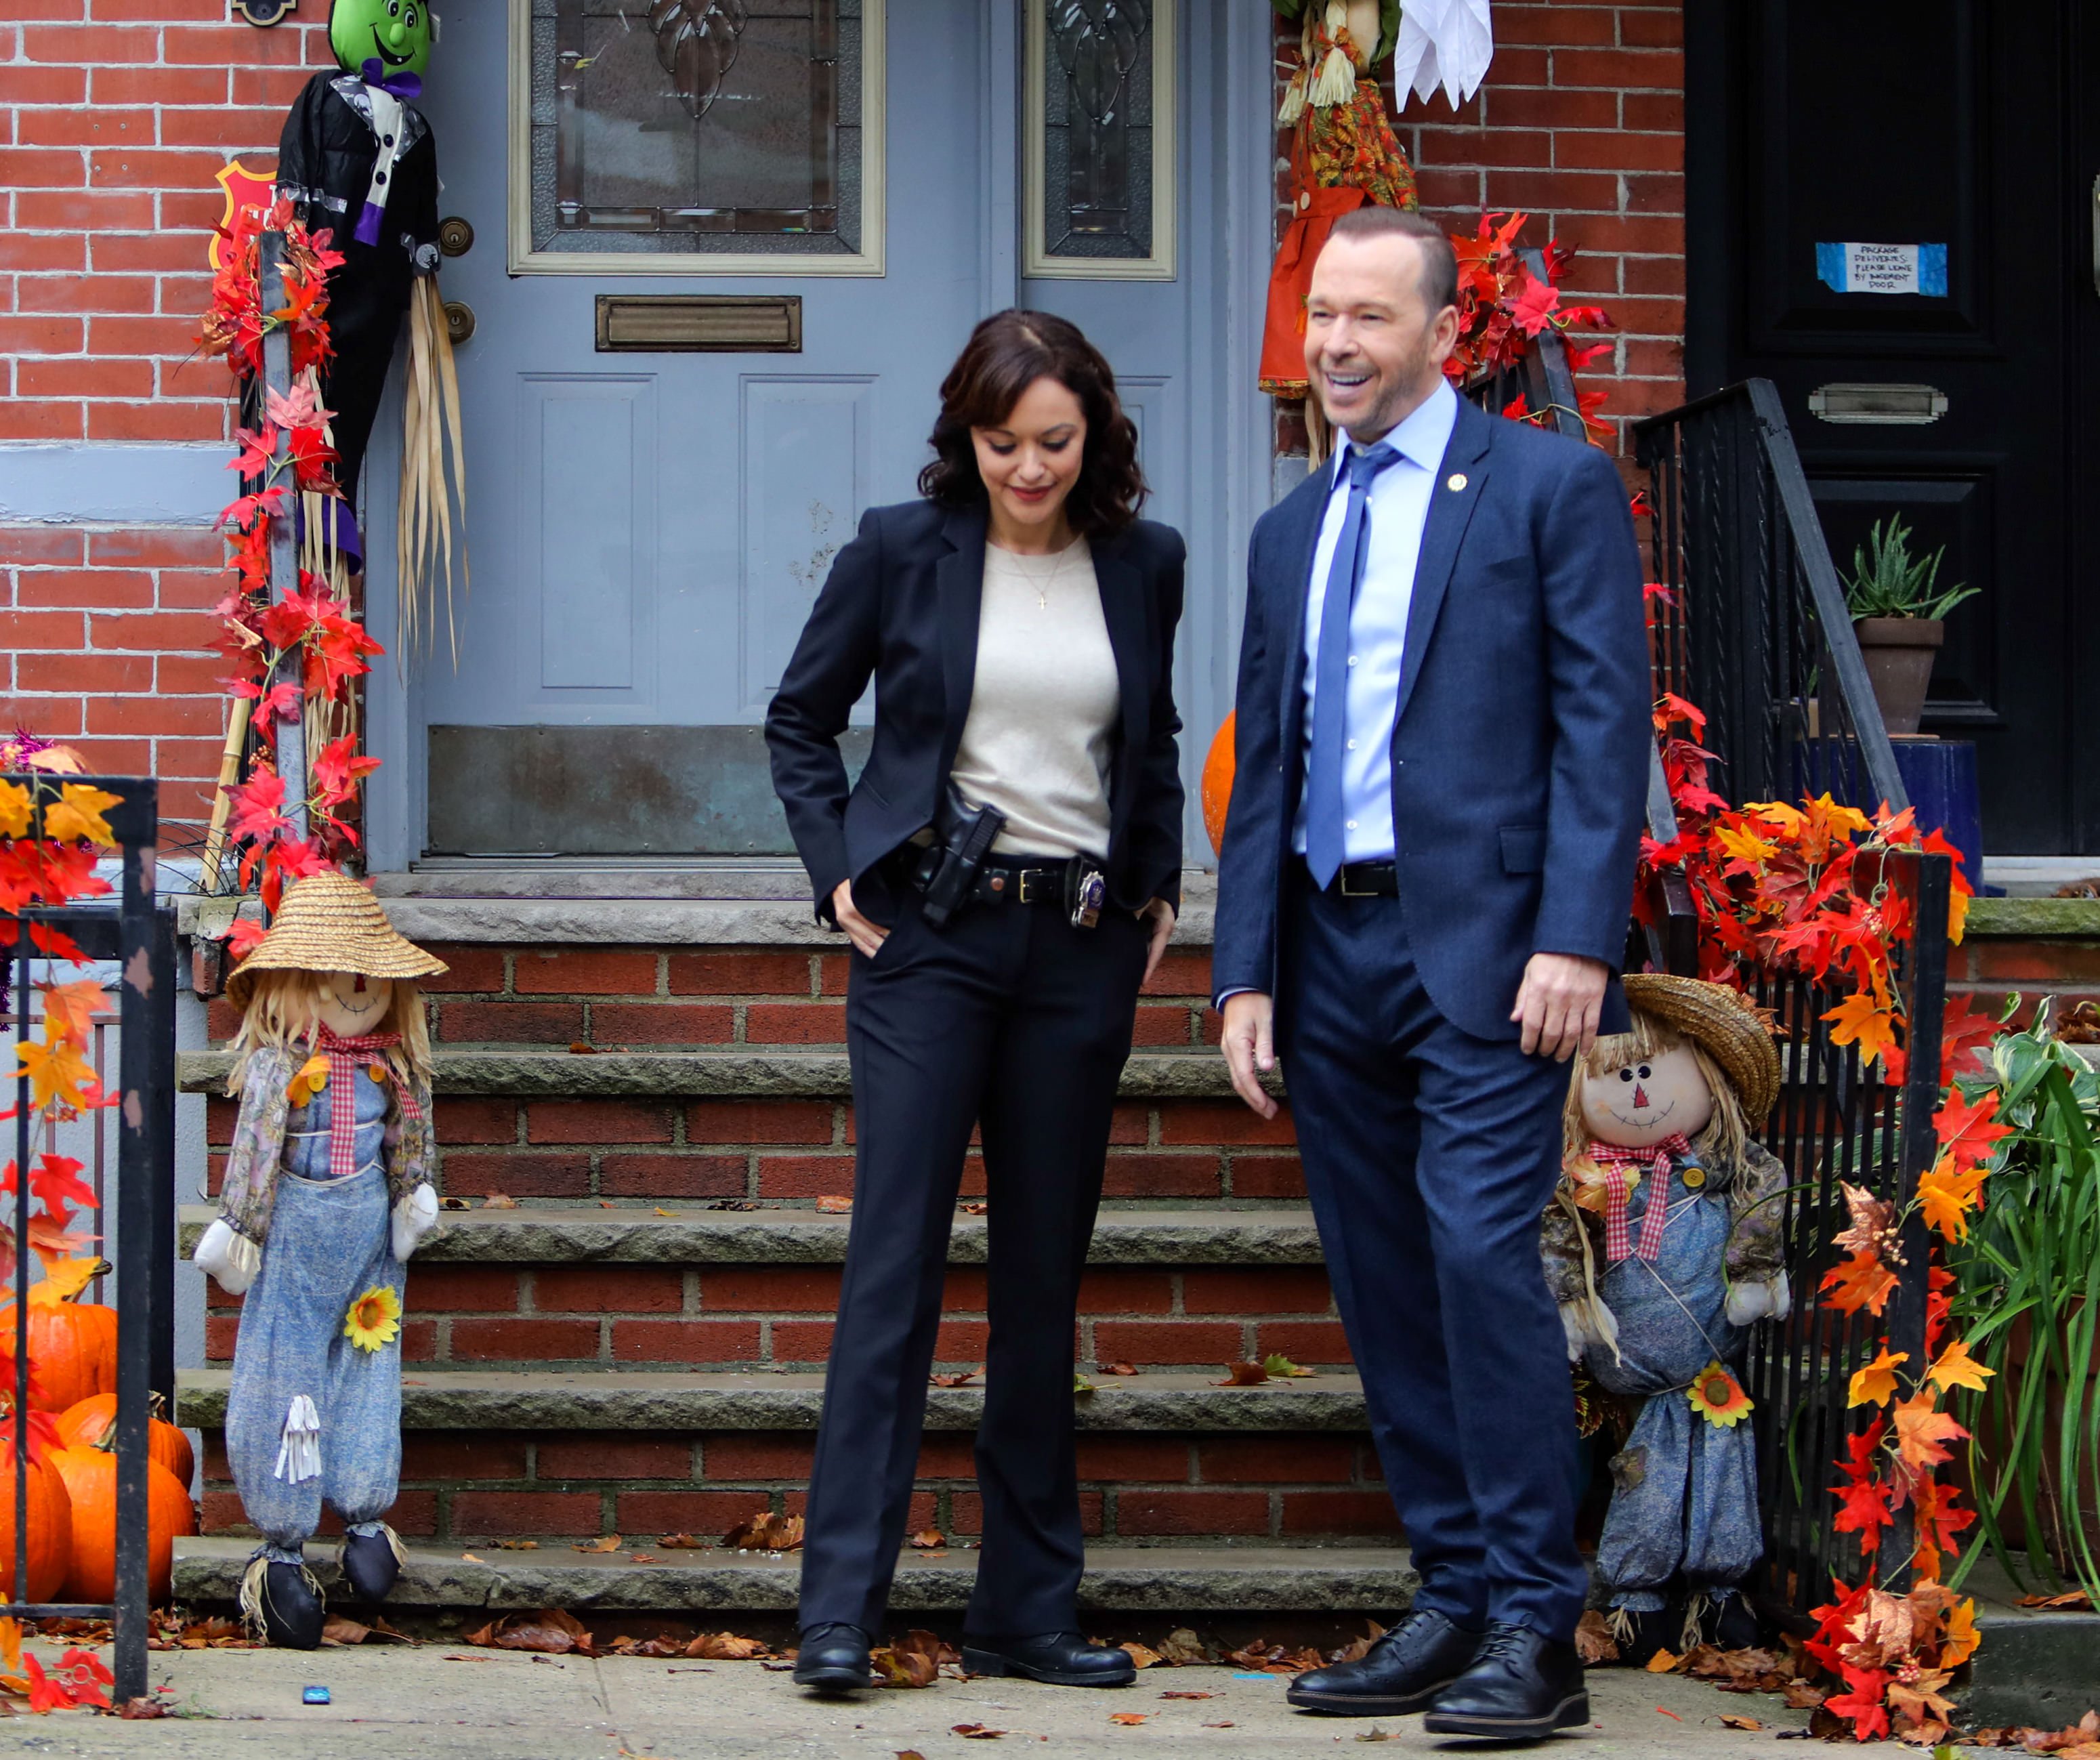 Marisa Ramirez and Donnie Wahlberg on the set of 'Blue Bloods' | Jose Perez/Bauer-Griffin/GC Images